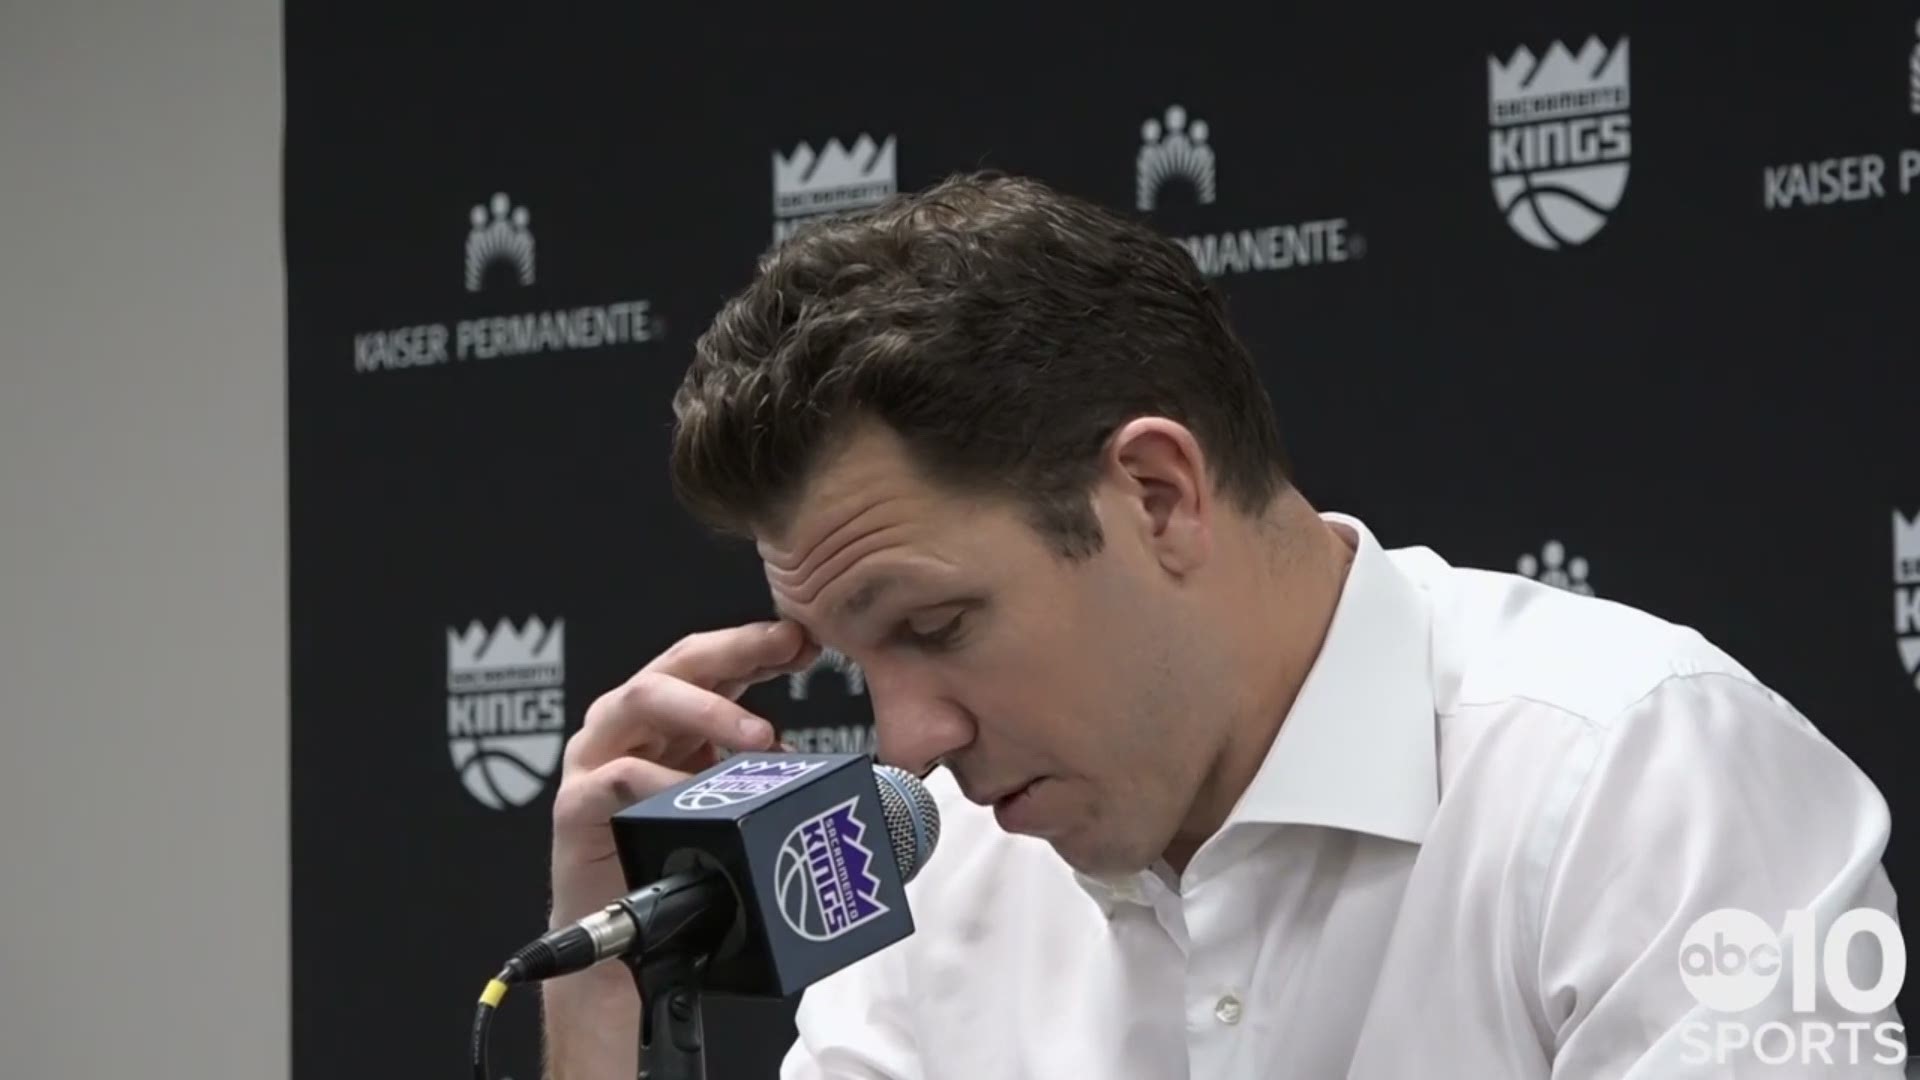 Sacramento Kings head coach Luke Walton discusses Tuesday’s 105-87 loss to the Los Angeles Clippers, dropping their eighth consecutive game.